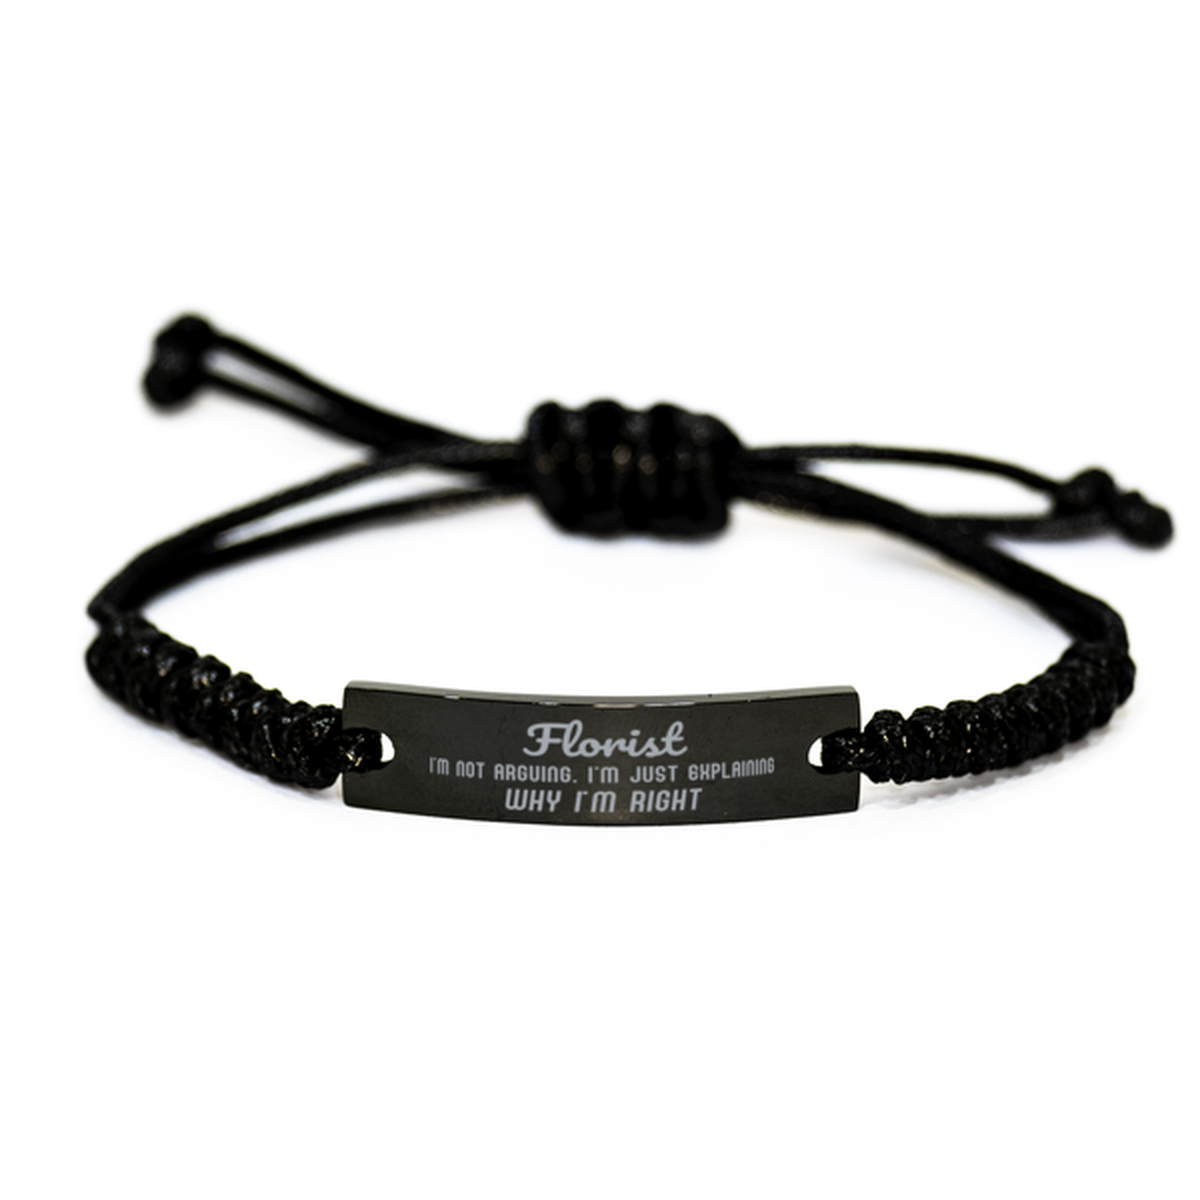 Florist I'm not Arguing. I'm Just Explaining Why I'm RIGHT Black Rope Bracelet, Funny Saying Quote Florist Gifts For Florist Graduation Birthday Christmas Gifts for Men Women Coworker